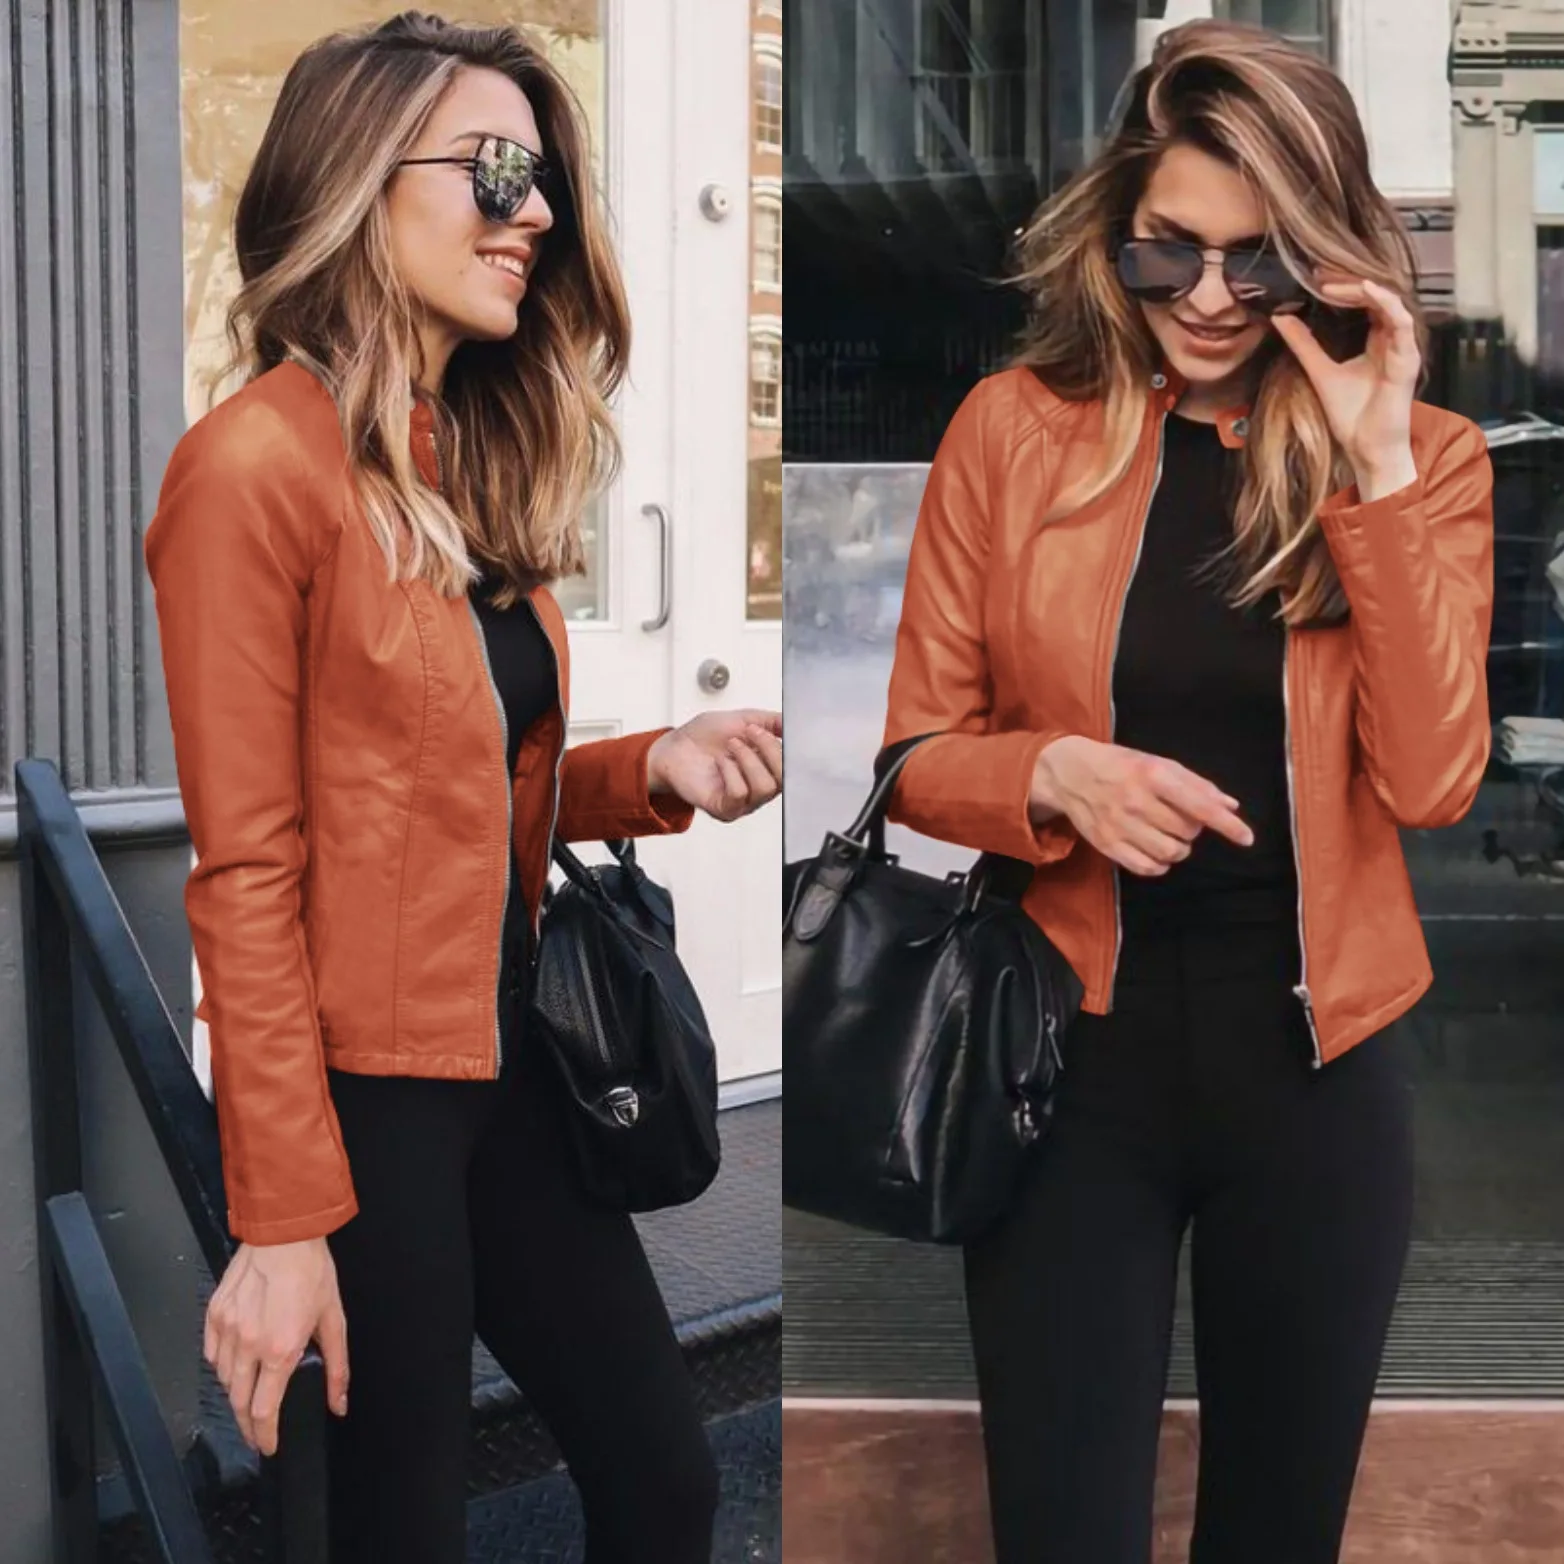 Hot Sale 2021 New Hot Sale Autumn and Winter Multicolor Women's Fashion Leather PU Slim Fit Leather Jacket Zipper Casual Top ralph lauren puffer jacket